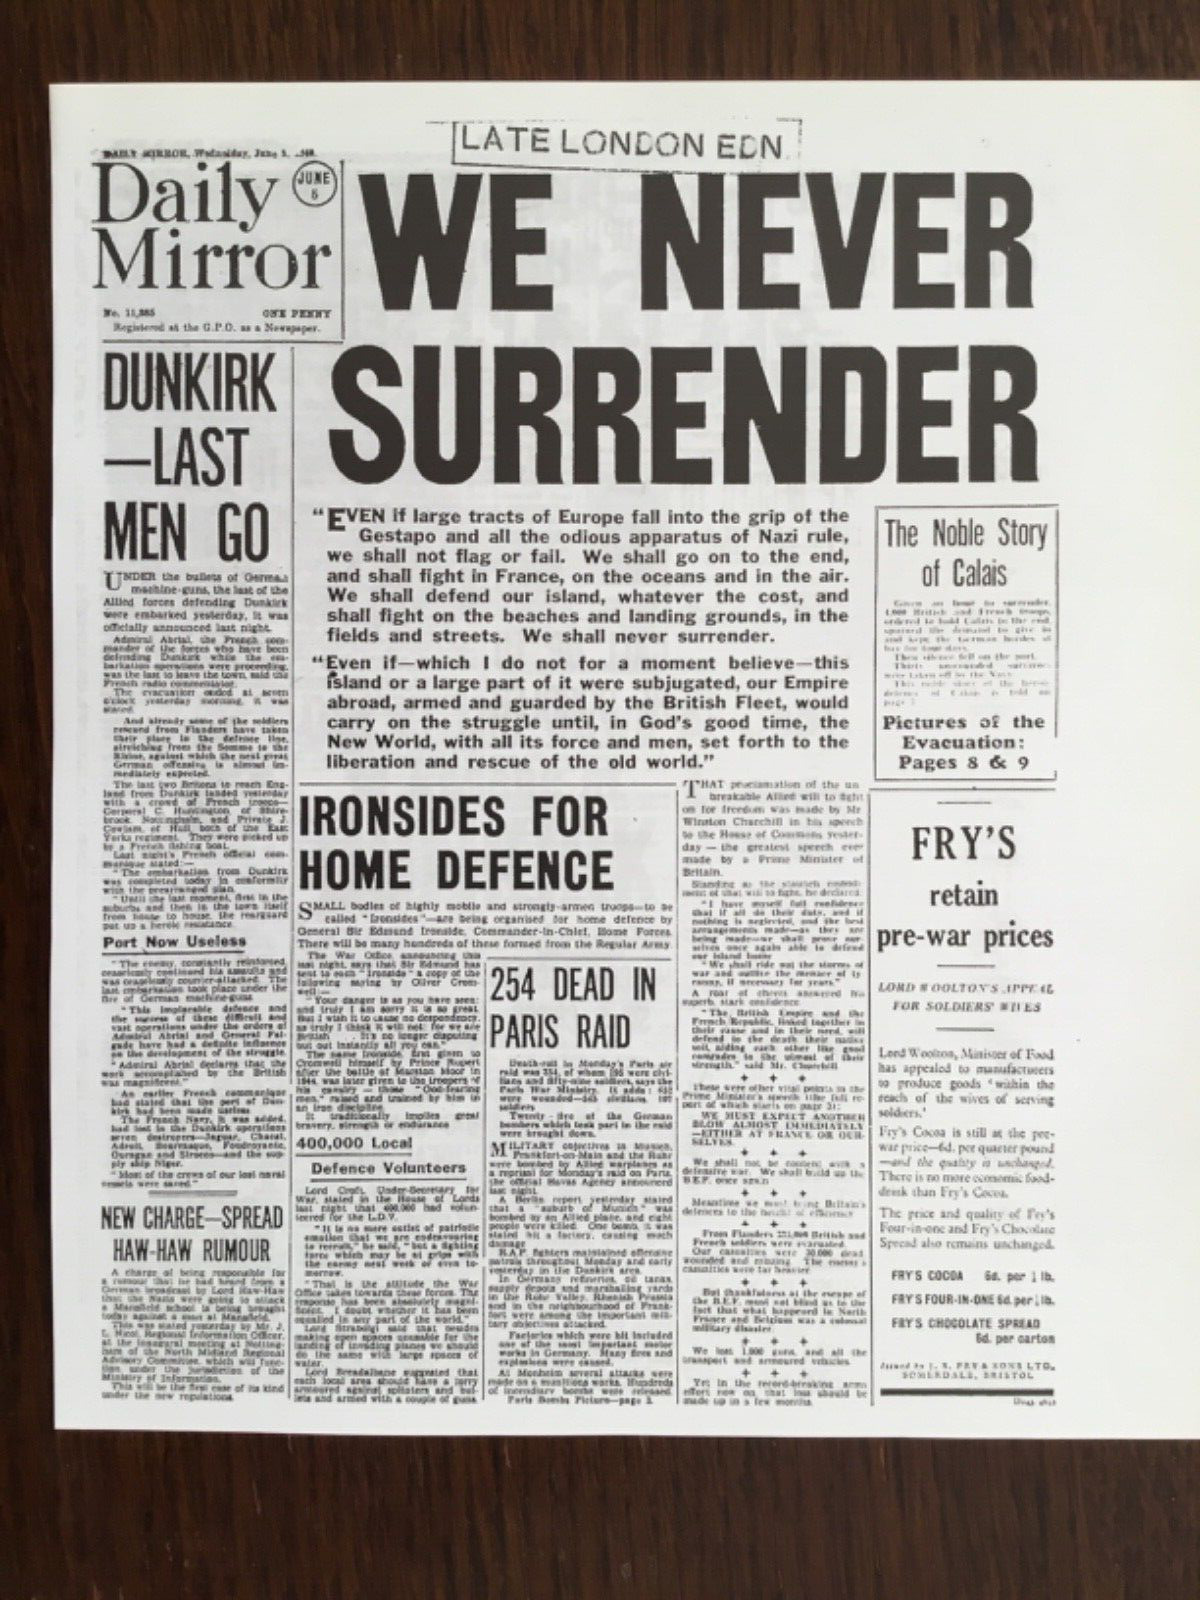 SMALL POSTER/NEWSPAPER PAGE(8.5”x 7”) 1940 DUNKIRK &  “WE SHALL NEVER SURRENDER”